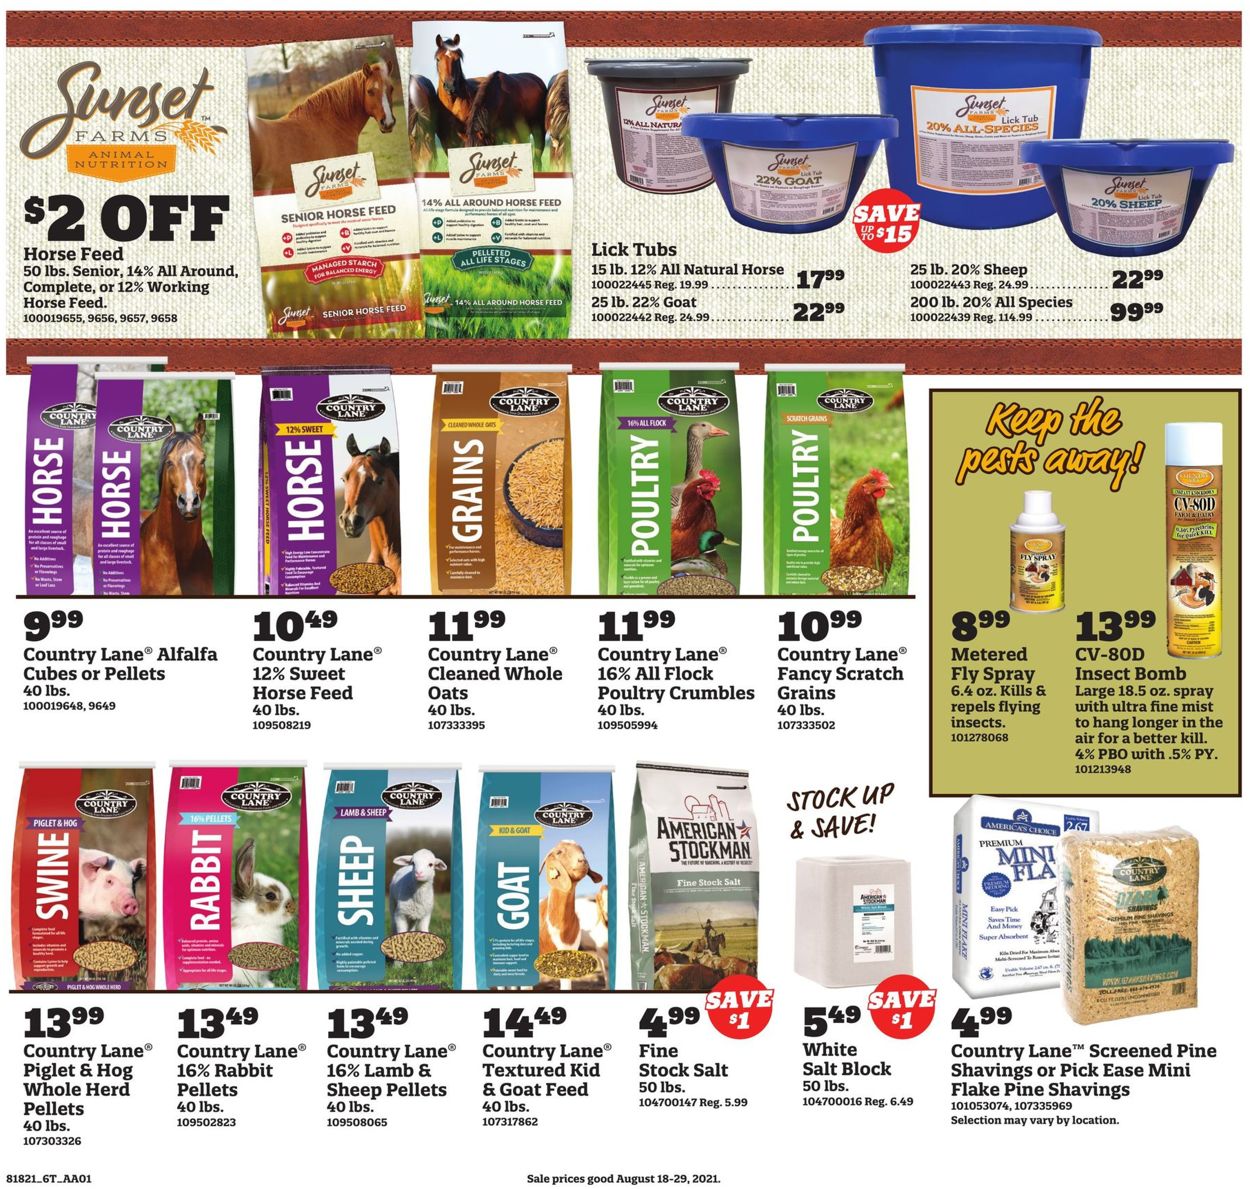 Orscheln Farm and Home Ad from 08/18/2021